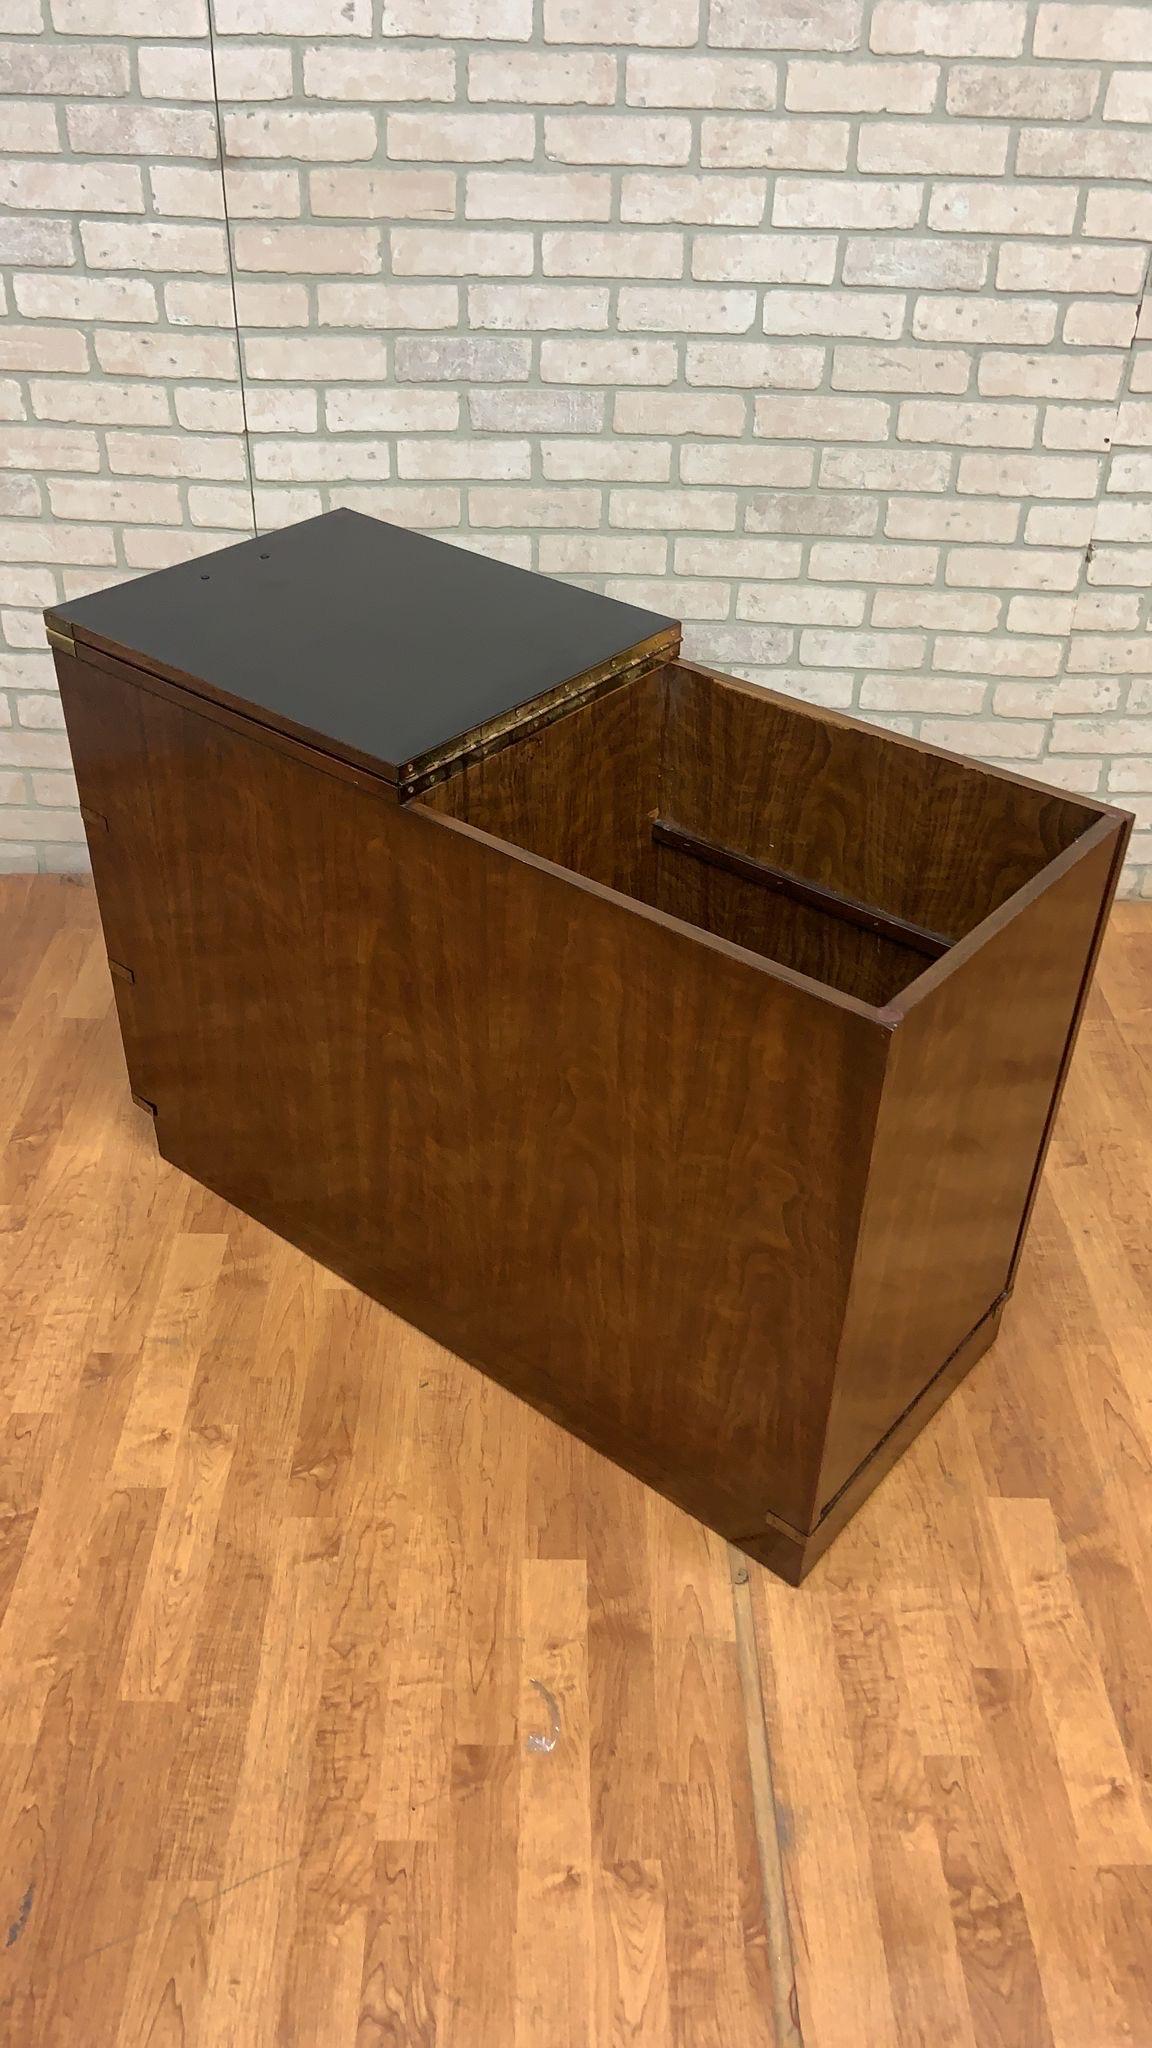 Vintage Mid Century Modern Campaign Style Lift Top 3 Drawer Executive File Chest by Drexel

Vintage mid century modern campaign style lift top 3 drawer executive file chest. This has been hand crafted using mahogany finished with veneer and has